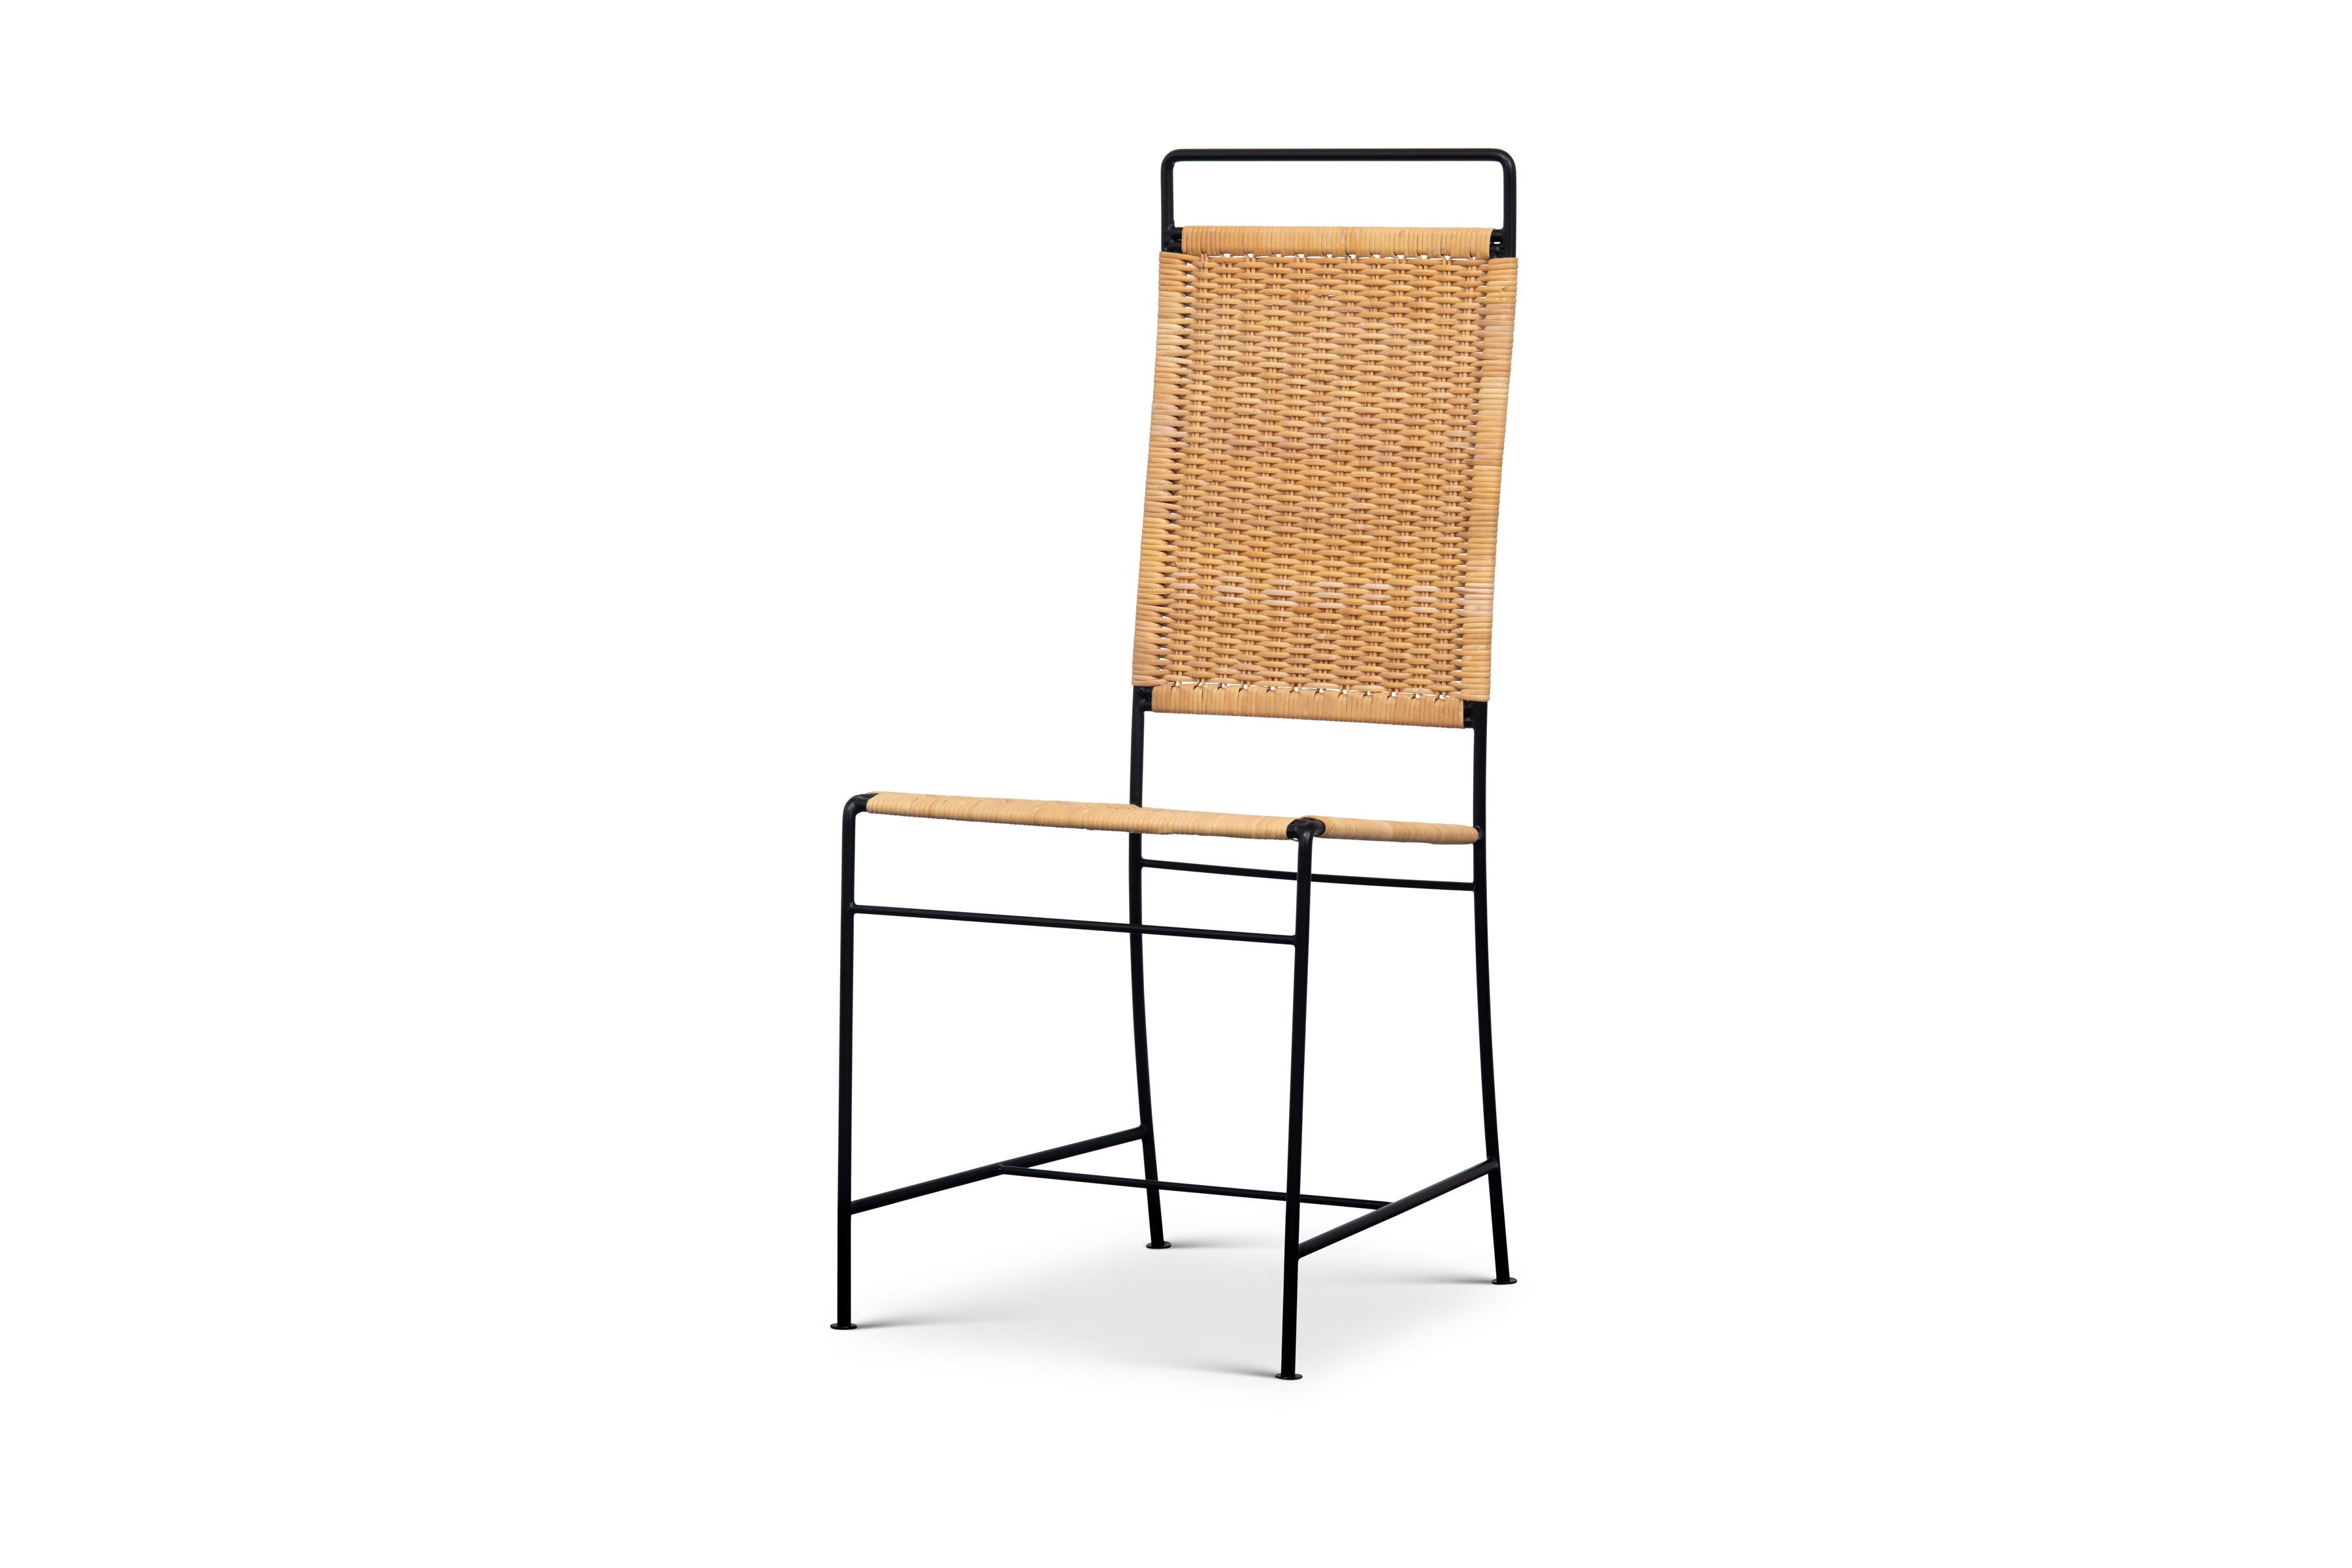 The Dodi chair has a blackened steel frame with a handwoven back and seat of natural rush. Cross stretchers offer stability and the legs are finished with coin-shaped tabs.

The chair frame is also available in stainless steel.

This Dodi chair